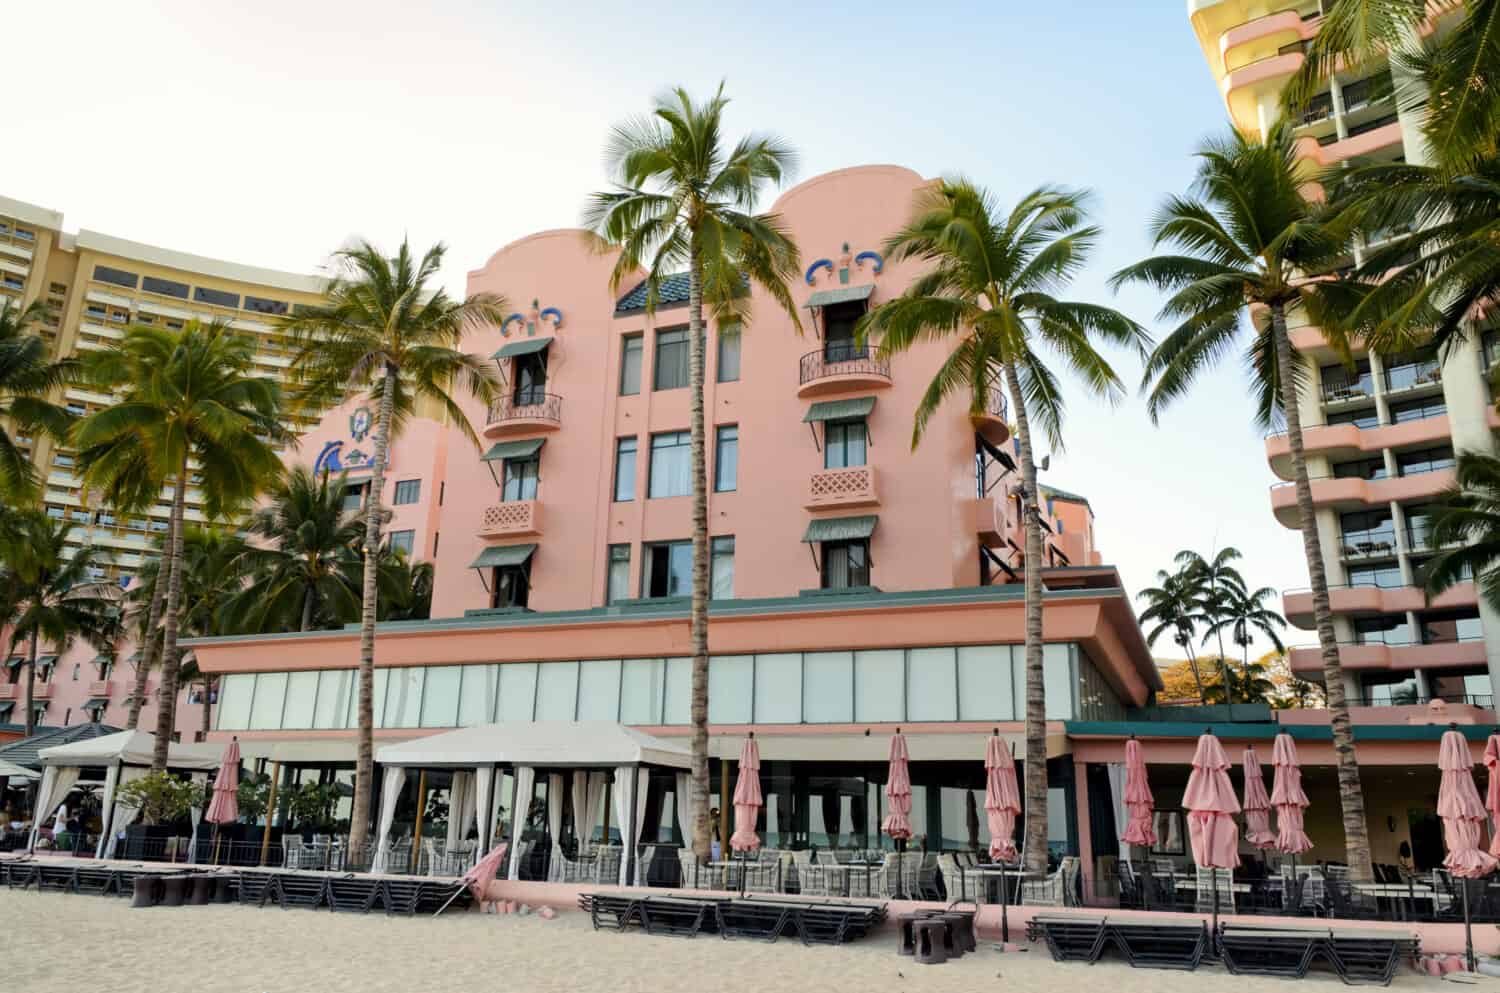 One of the first hotels established in Waikiki, The Royal Hawaiian is considered one of the flagship hotels in Hawaii tourism.